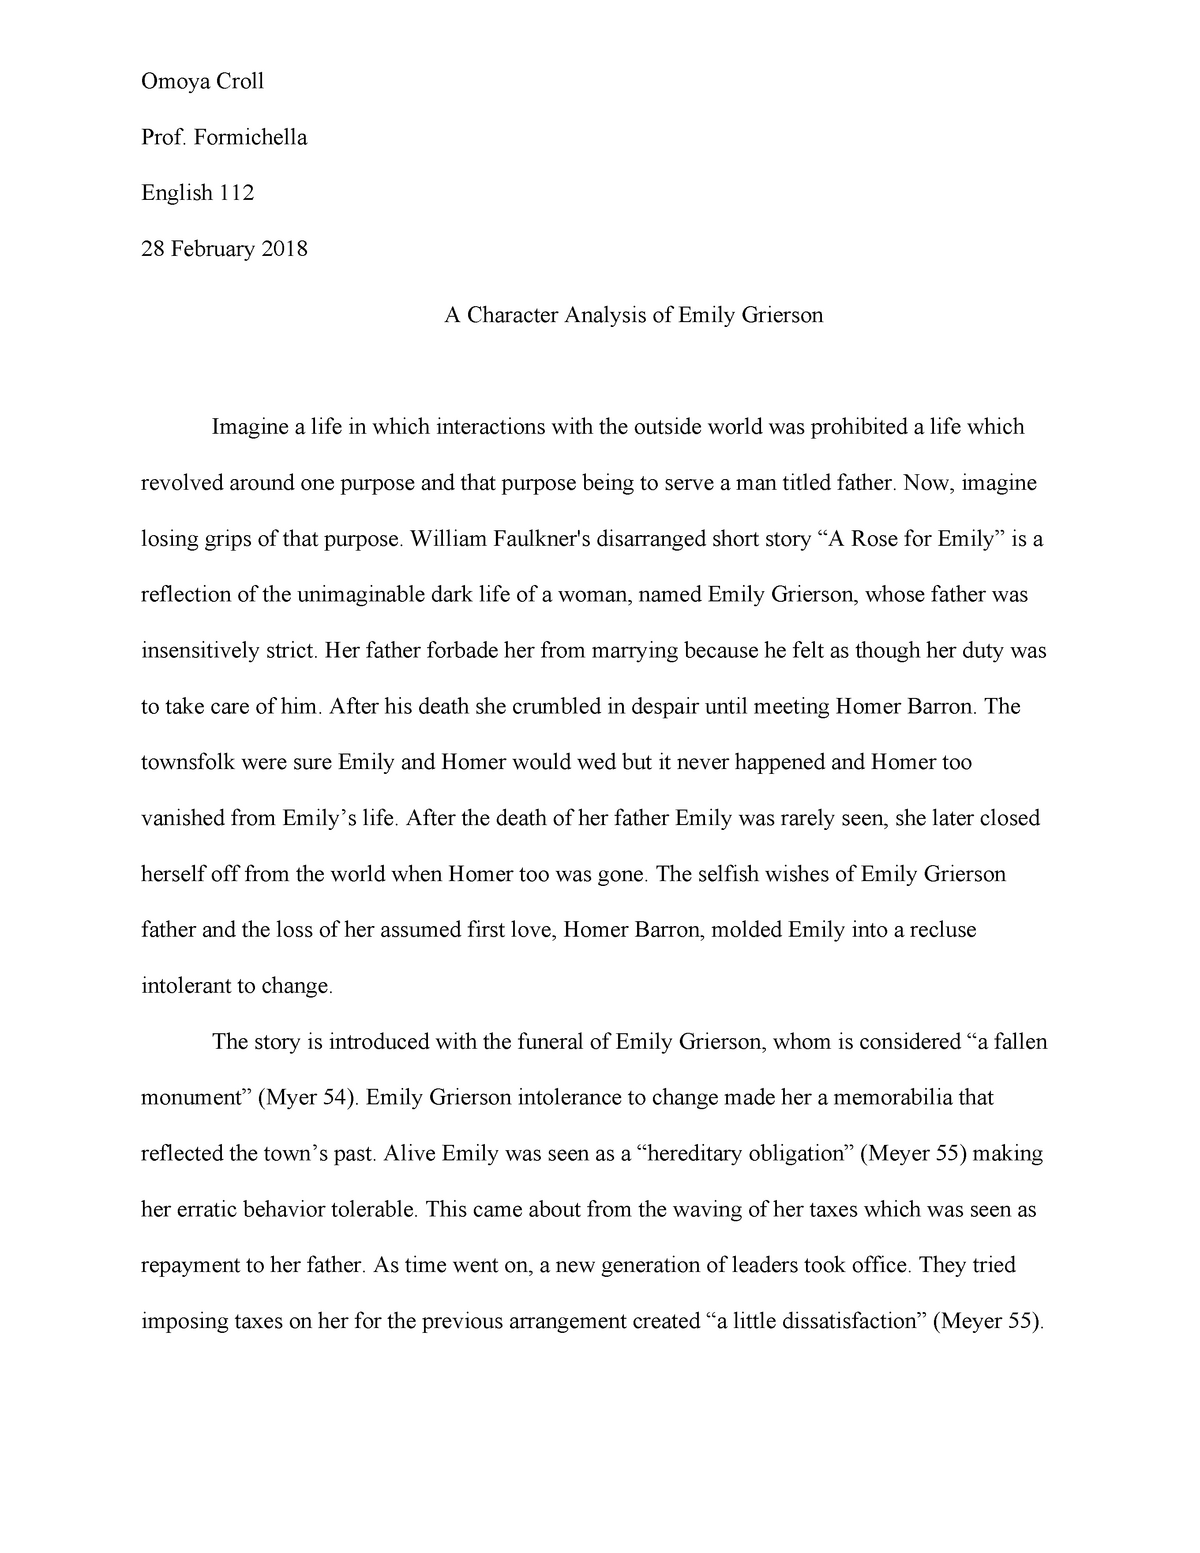 character analysis essay on emily grierson